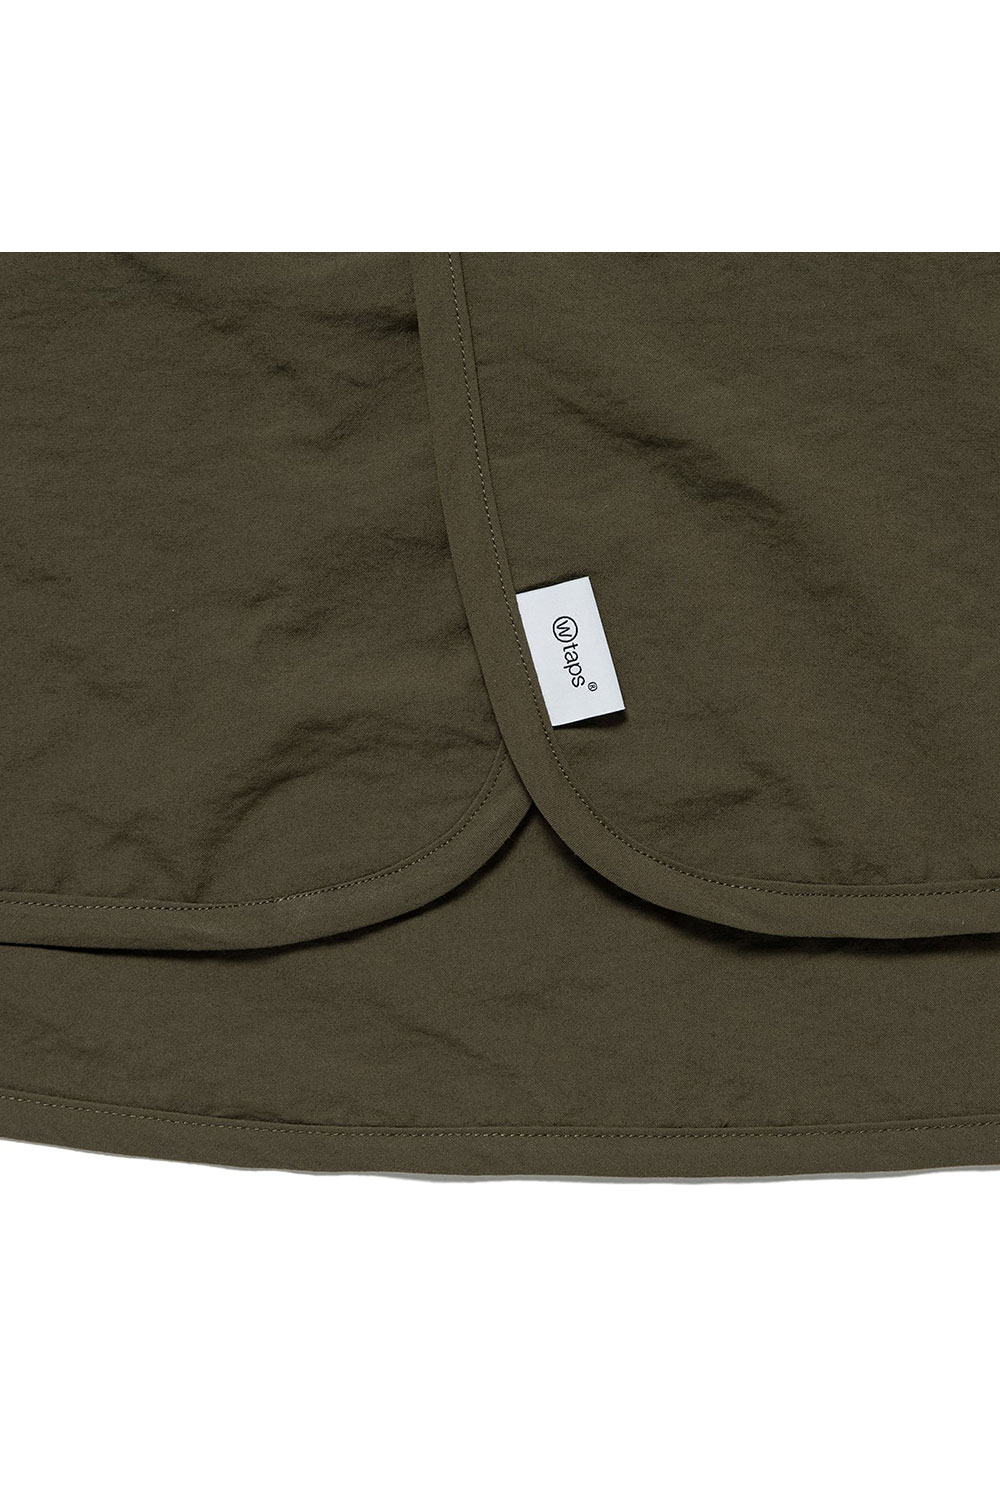 SCOUT 02 / LS / POLY. BROADCLOTH. SPEC / OLIVE DRAB (241CWDT-SHM06 ...